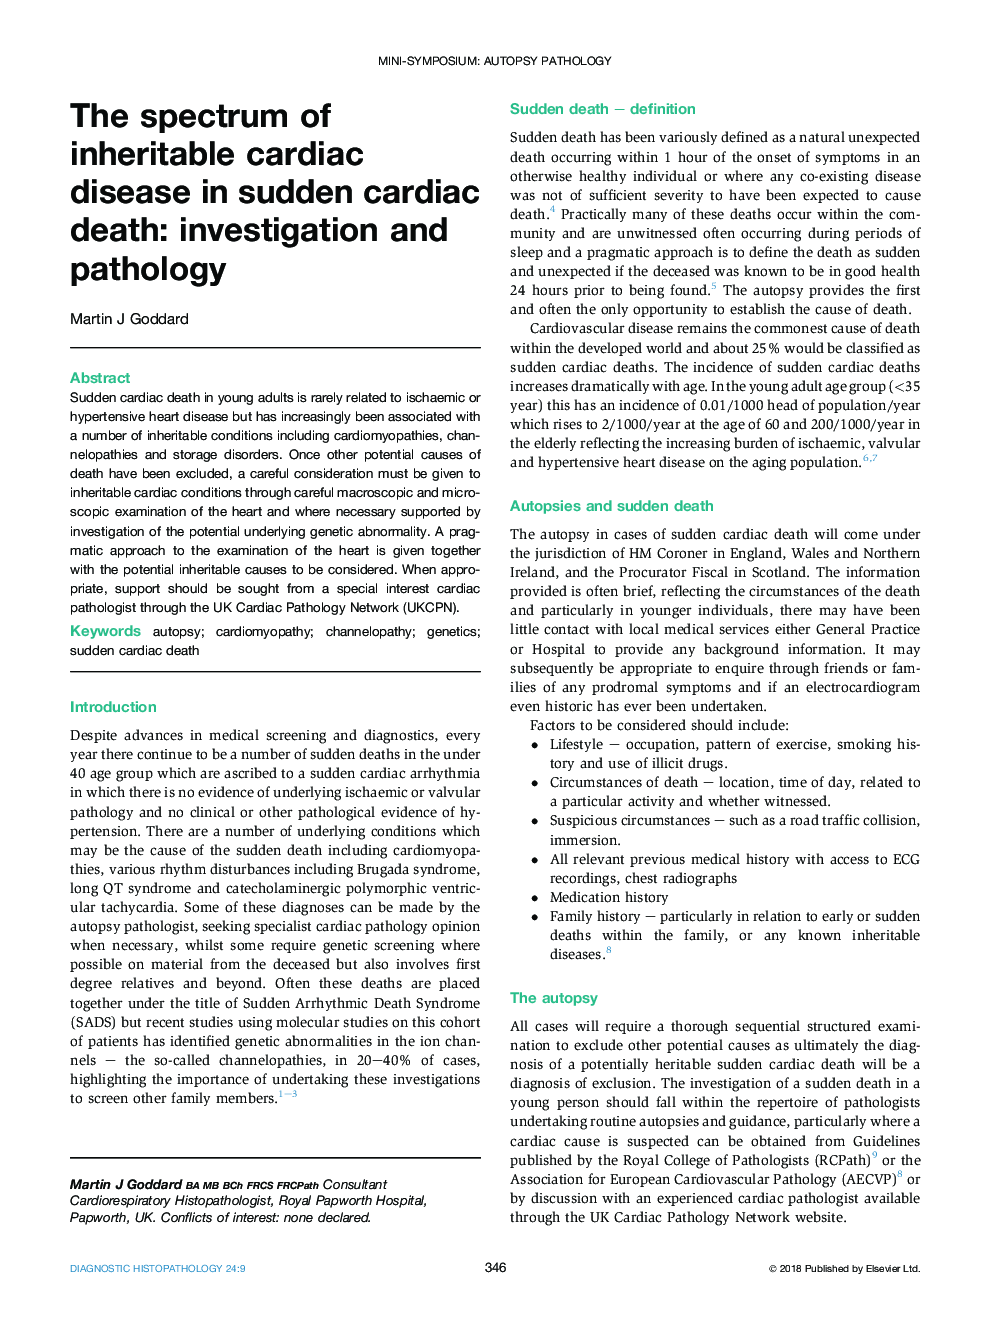 The spectrum of inheritable cardiac disease in sudden cardiac death: investigation and pathology